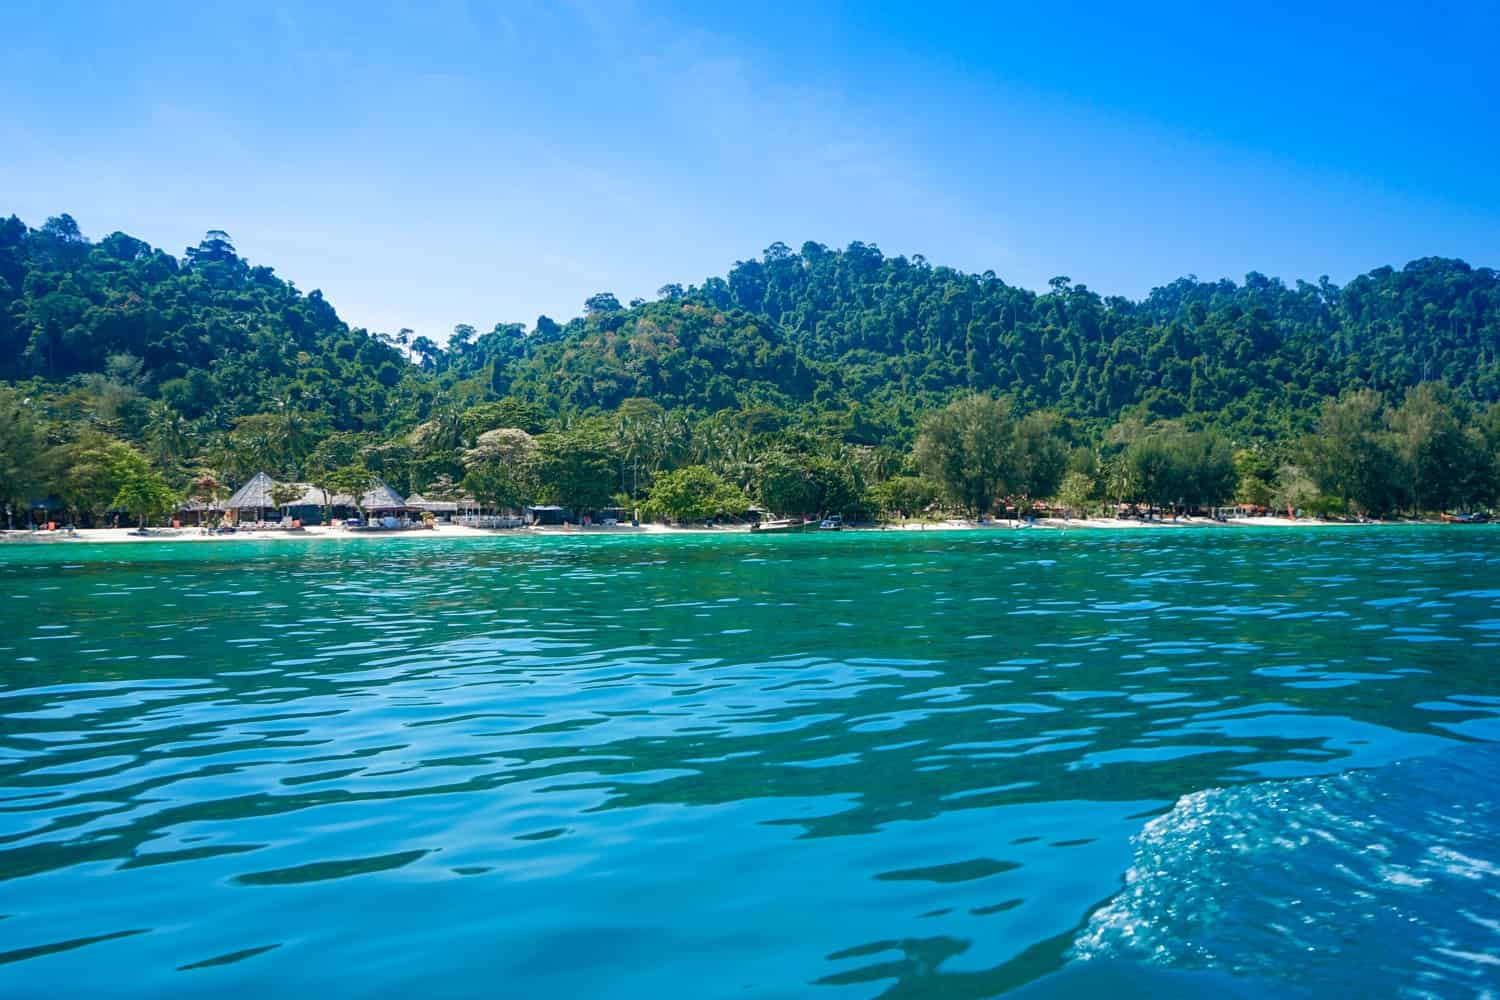 Koh Ngai from the water